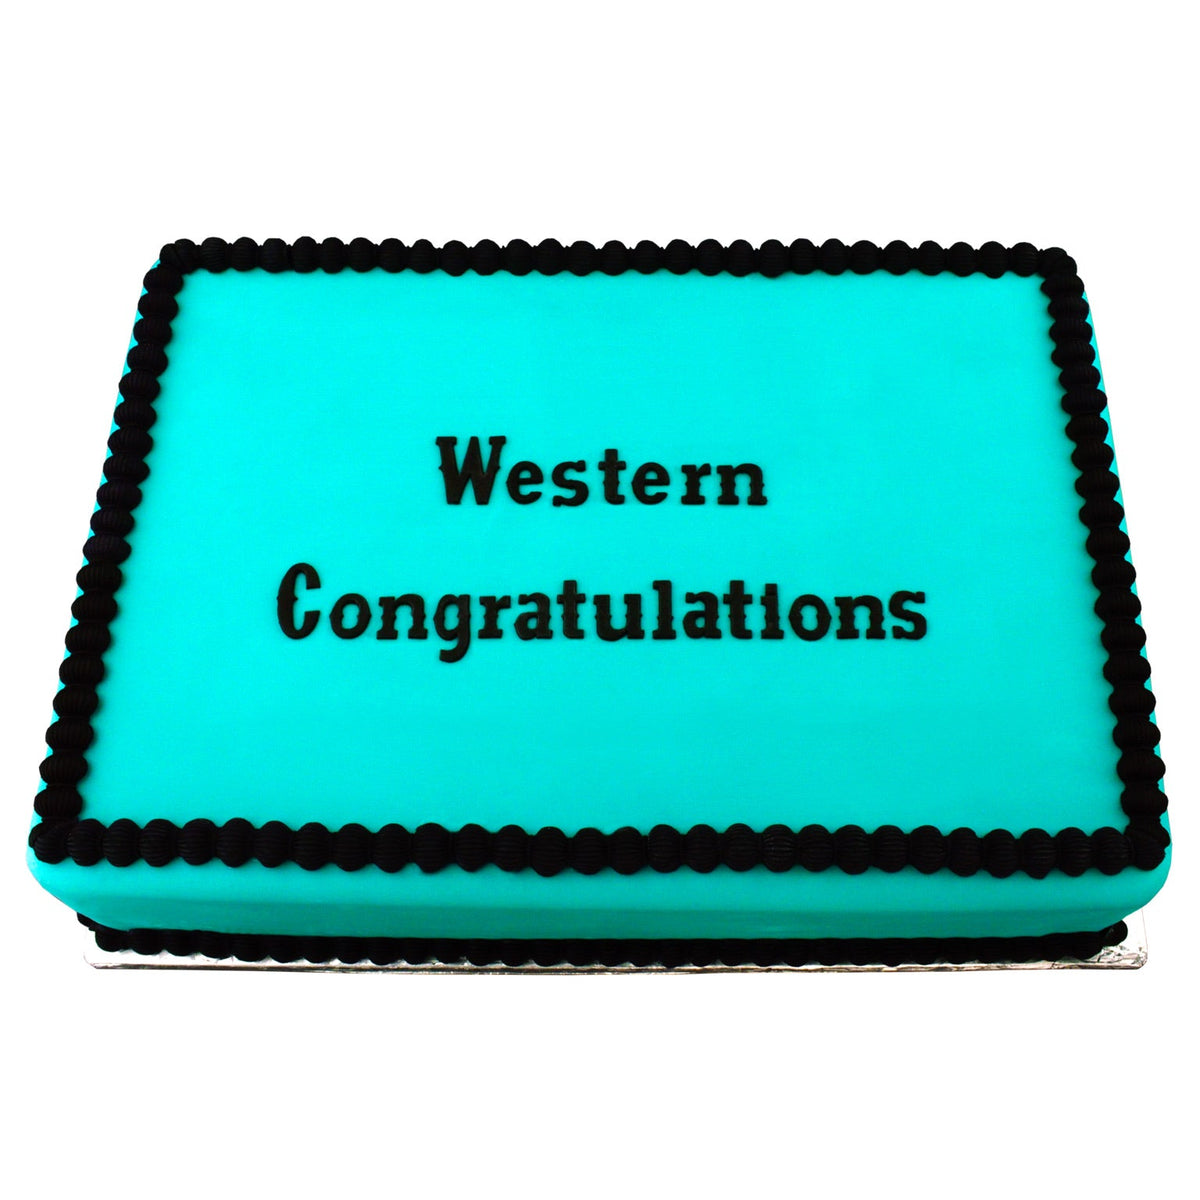 Decorated Cake using Western Congratulations Flexabet Food Safe Silicone Letter Maker by Marvelous Molds